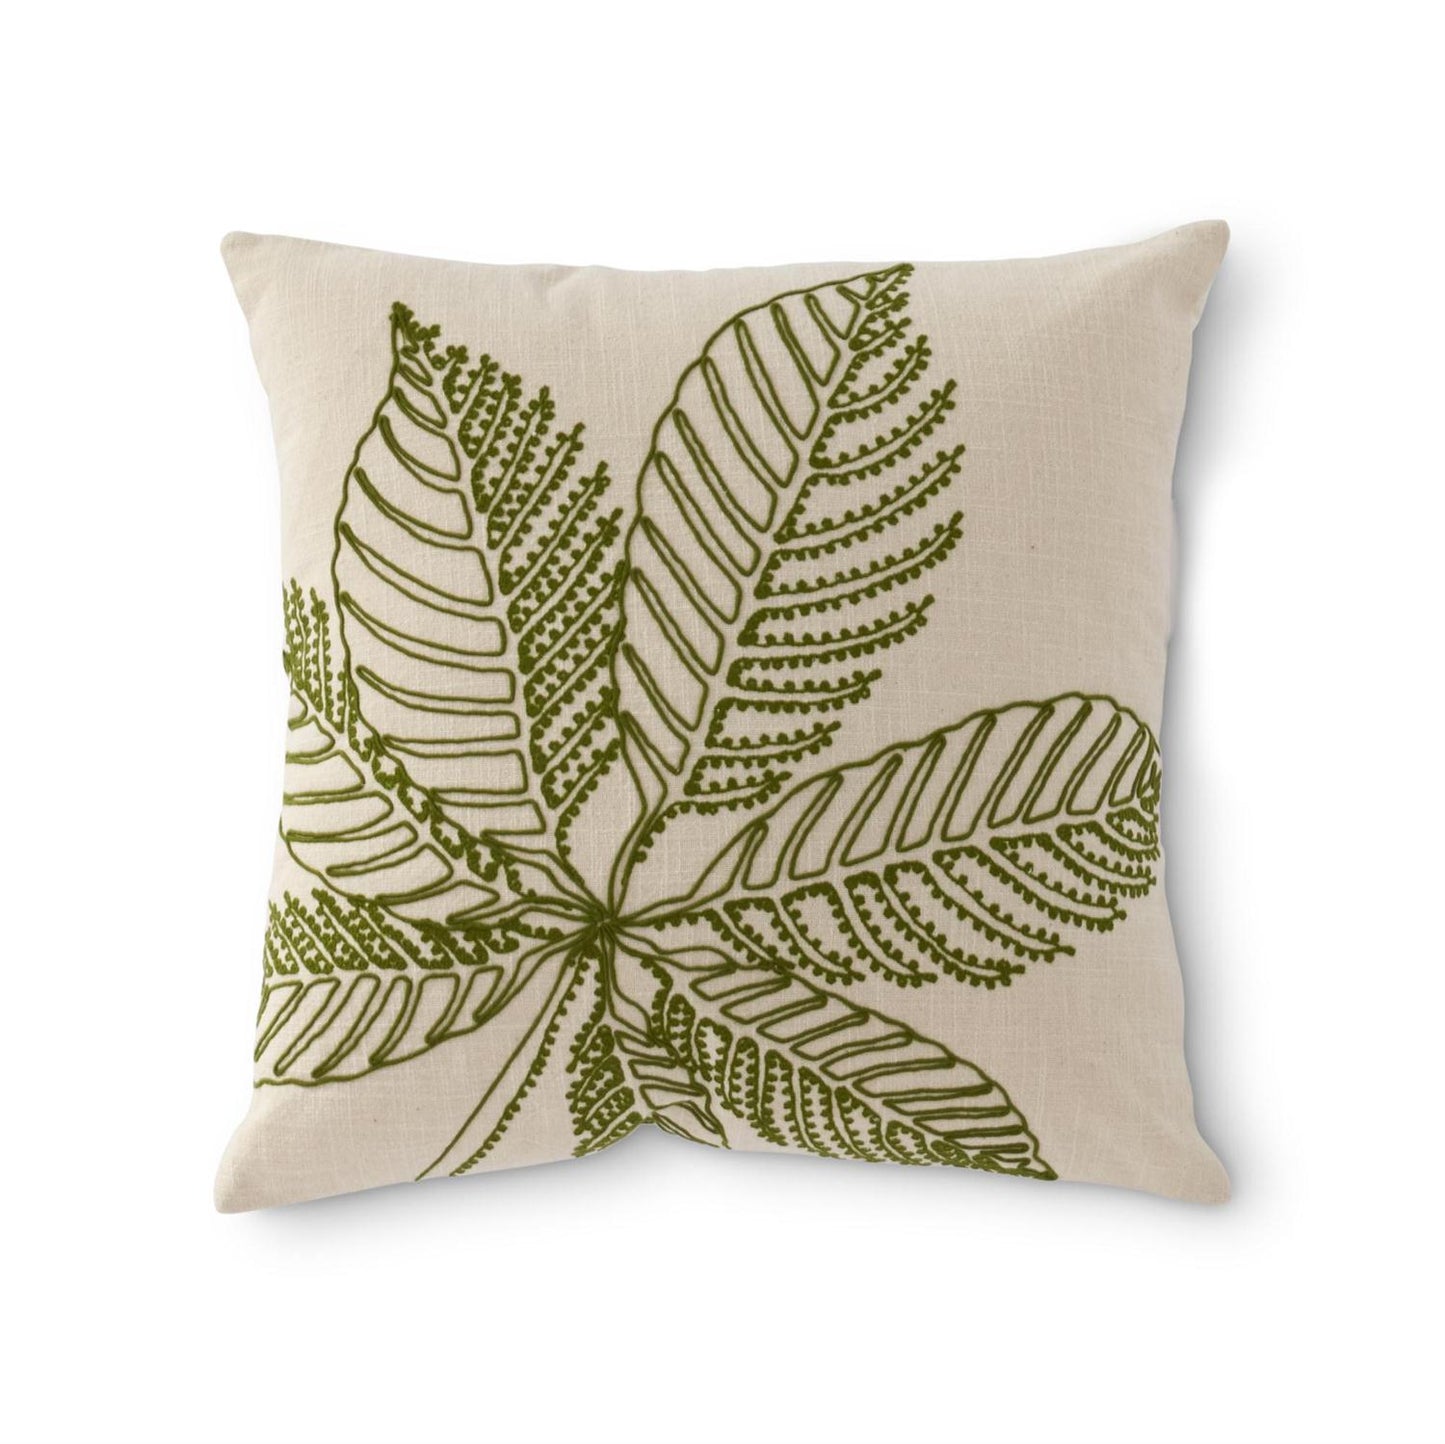 20" Embroidered Leaf Pillow